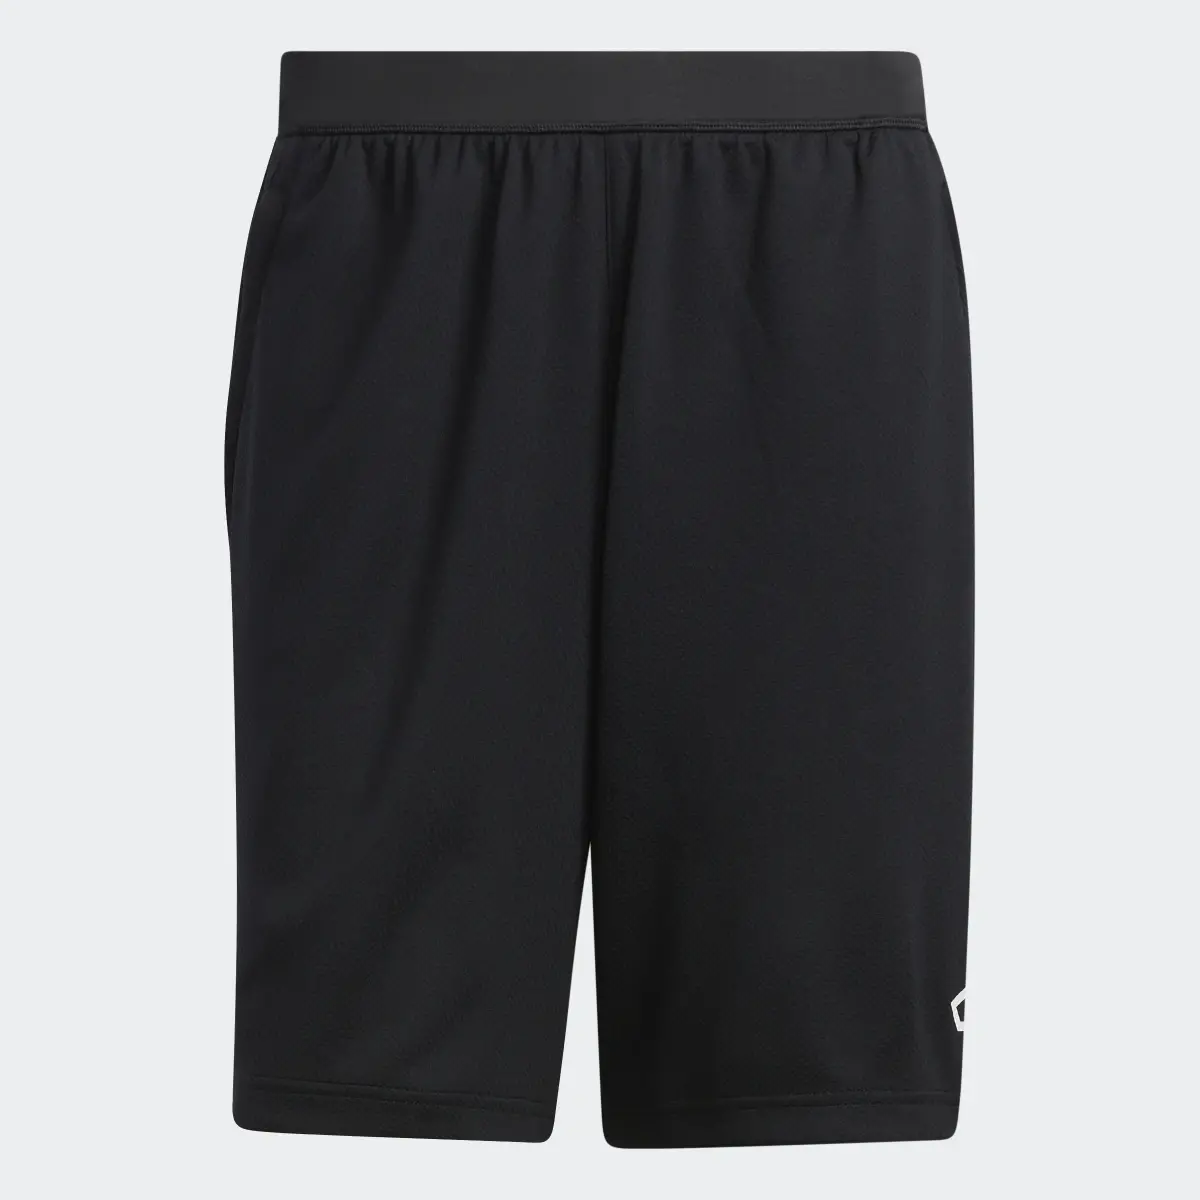 Adidas Axis Branded Knit Shorts. 1